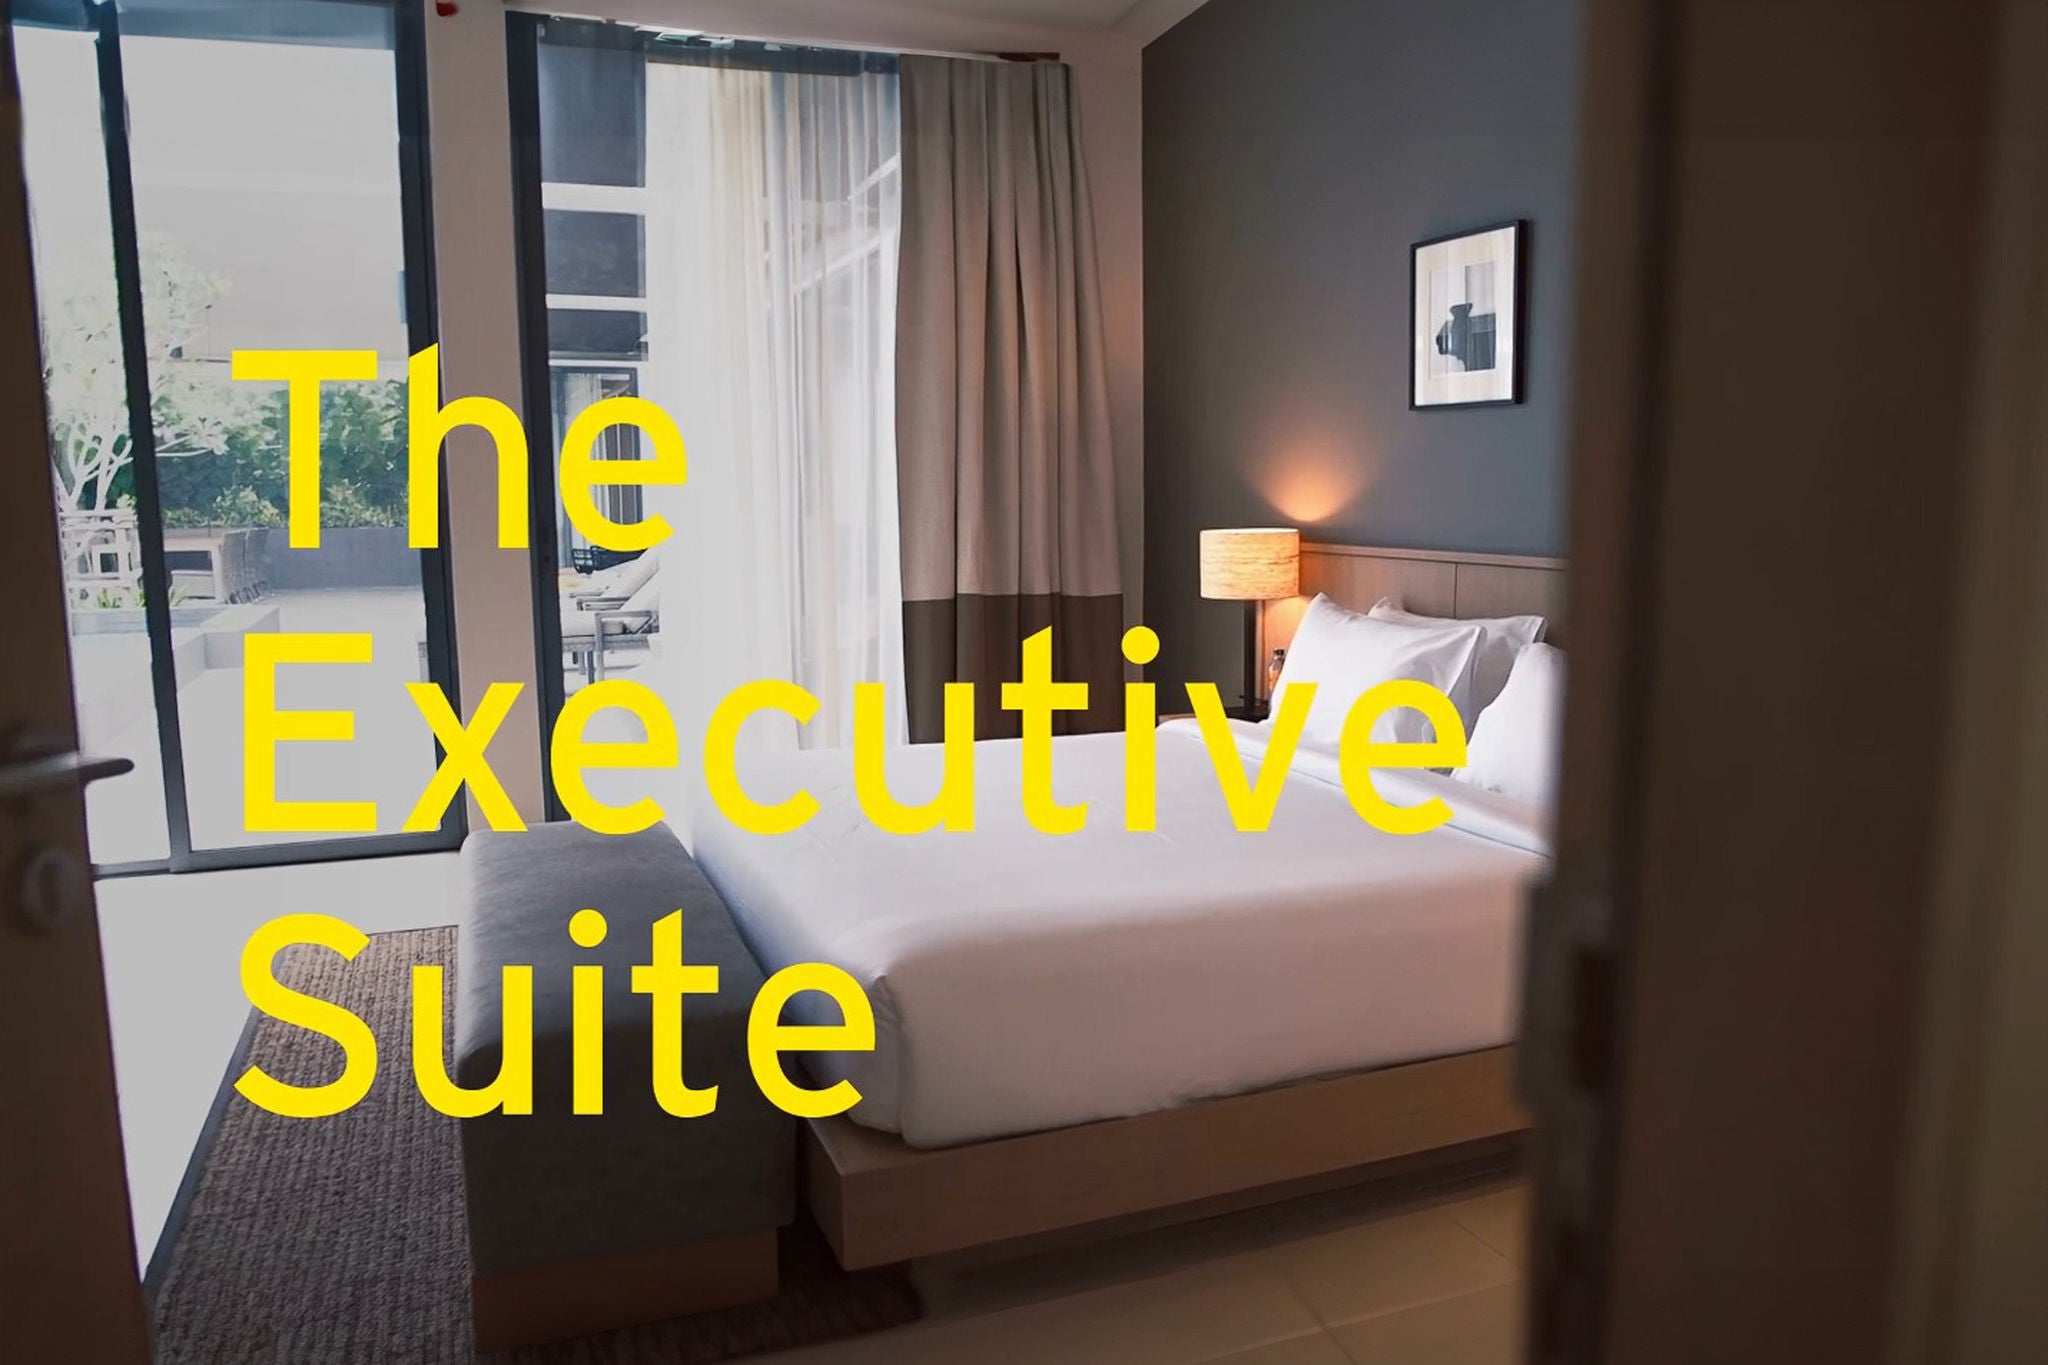 The Executive Suite